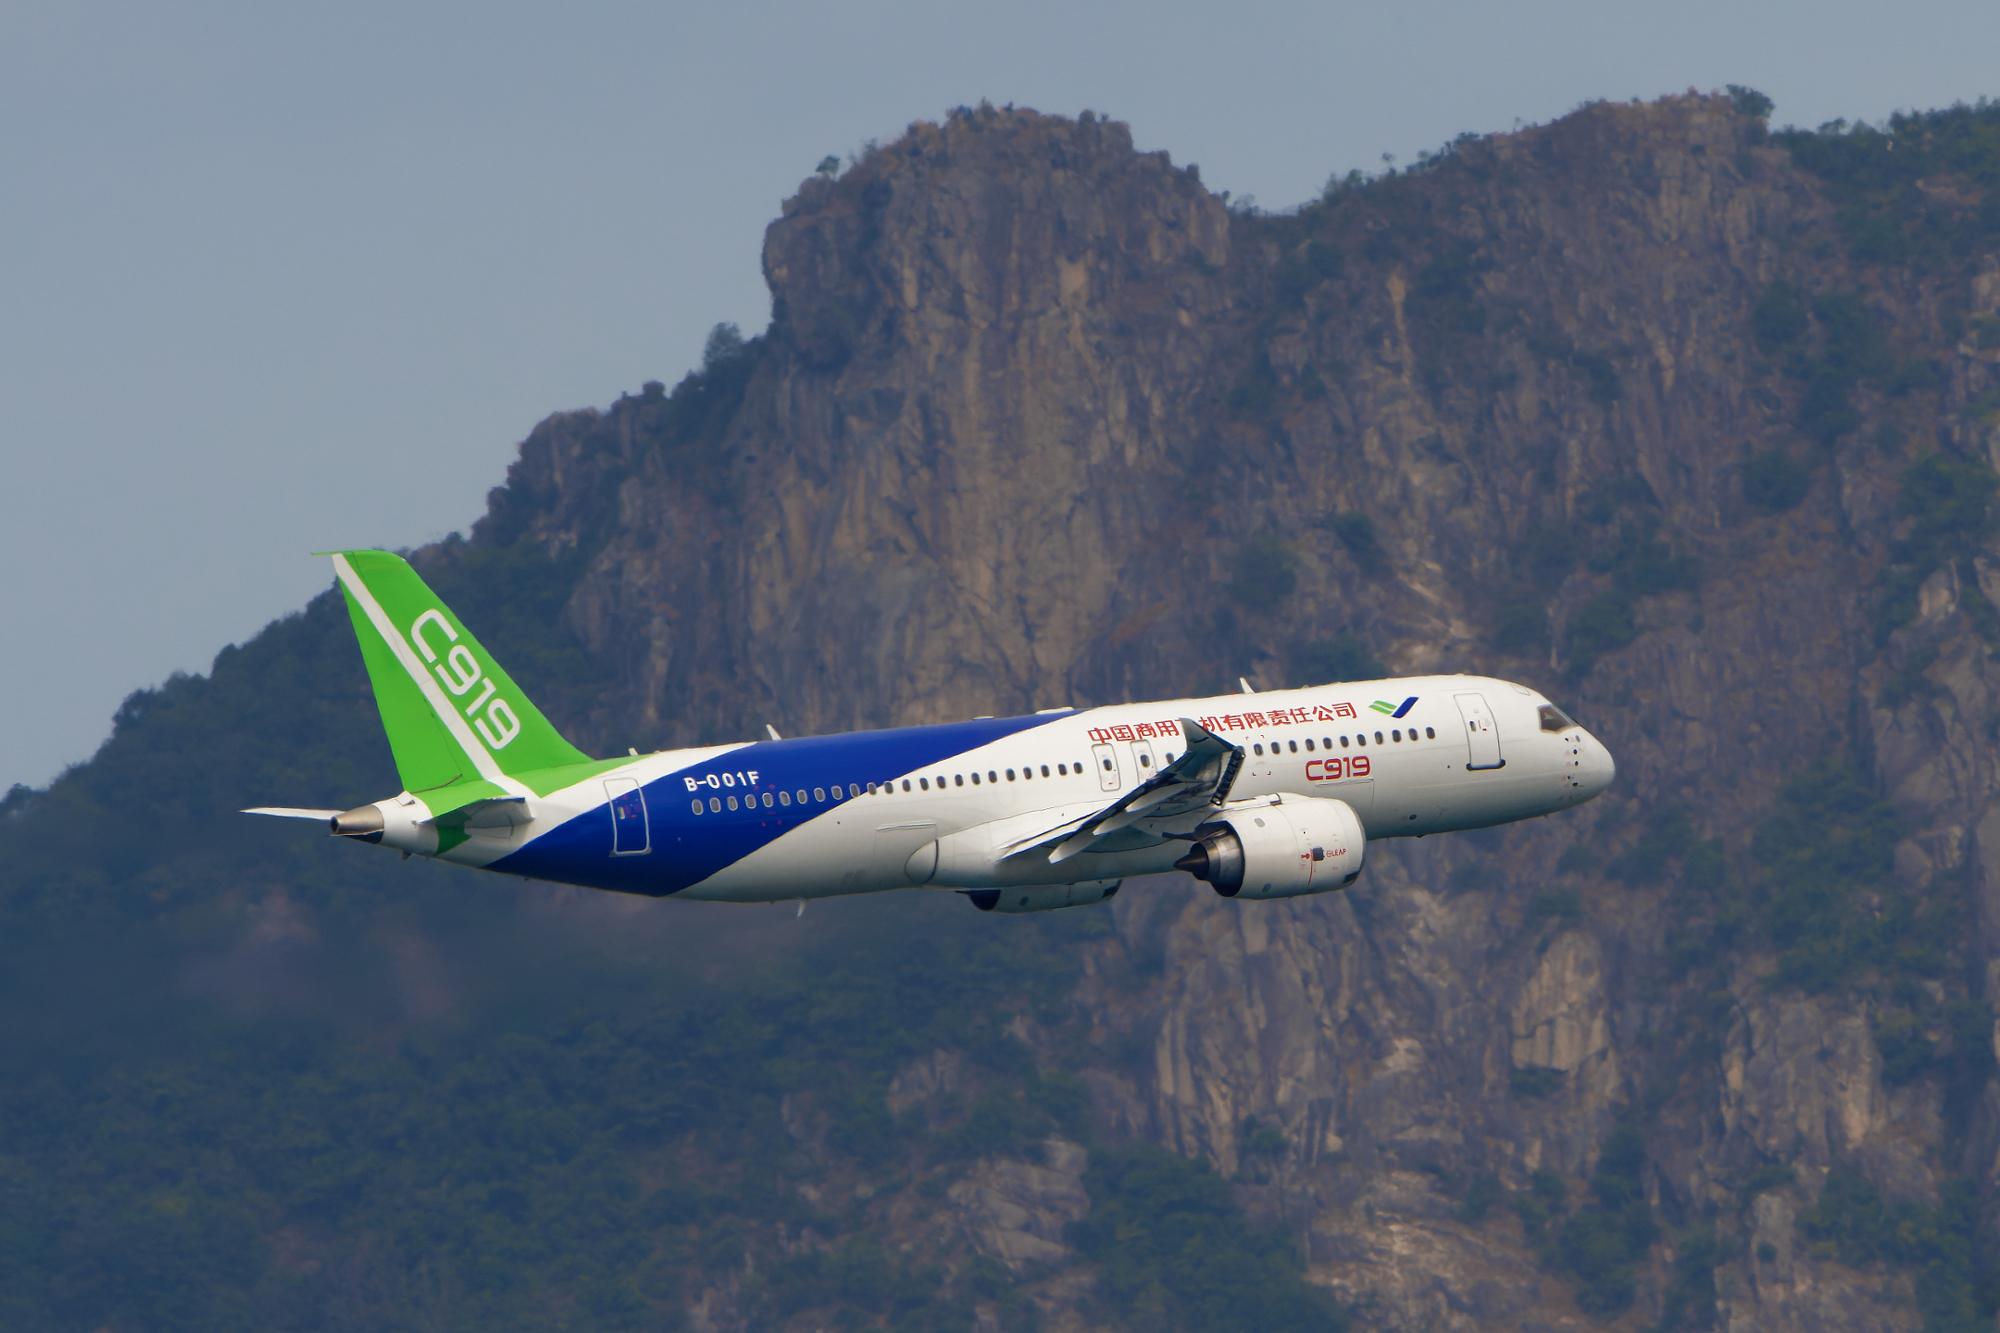 The results of the C919 Aircraft Flight Demonstration in Hong Kong Photo Competition, jointly organised by the Transport and Logistics Bureau and the Airport Authority Hong Kong, were announced today (January 26). Picture shows the champion photo of the competition.